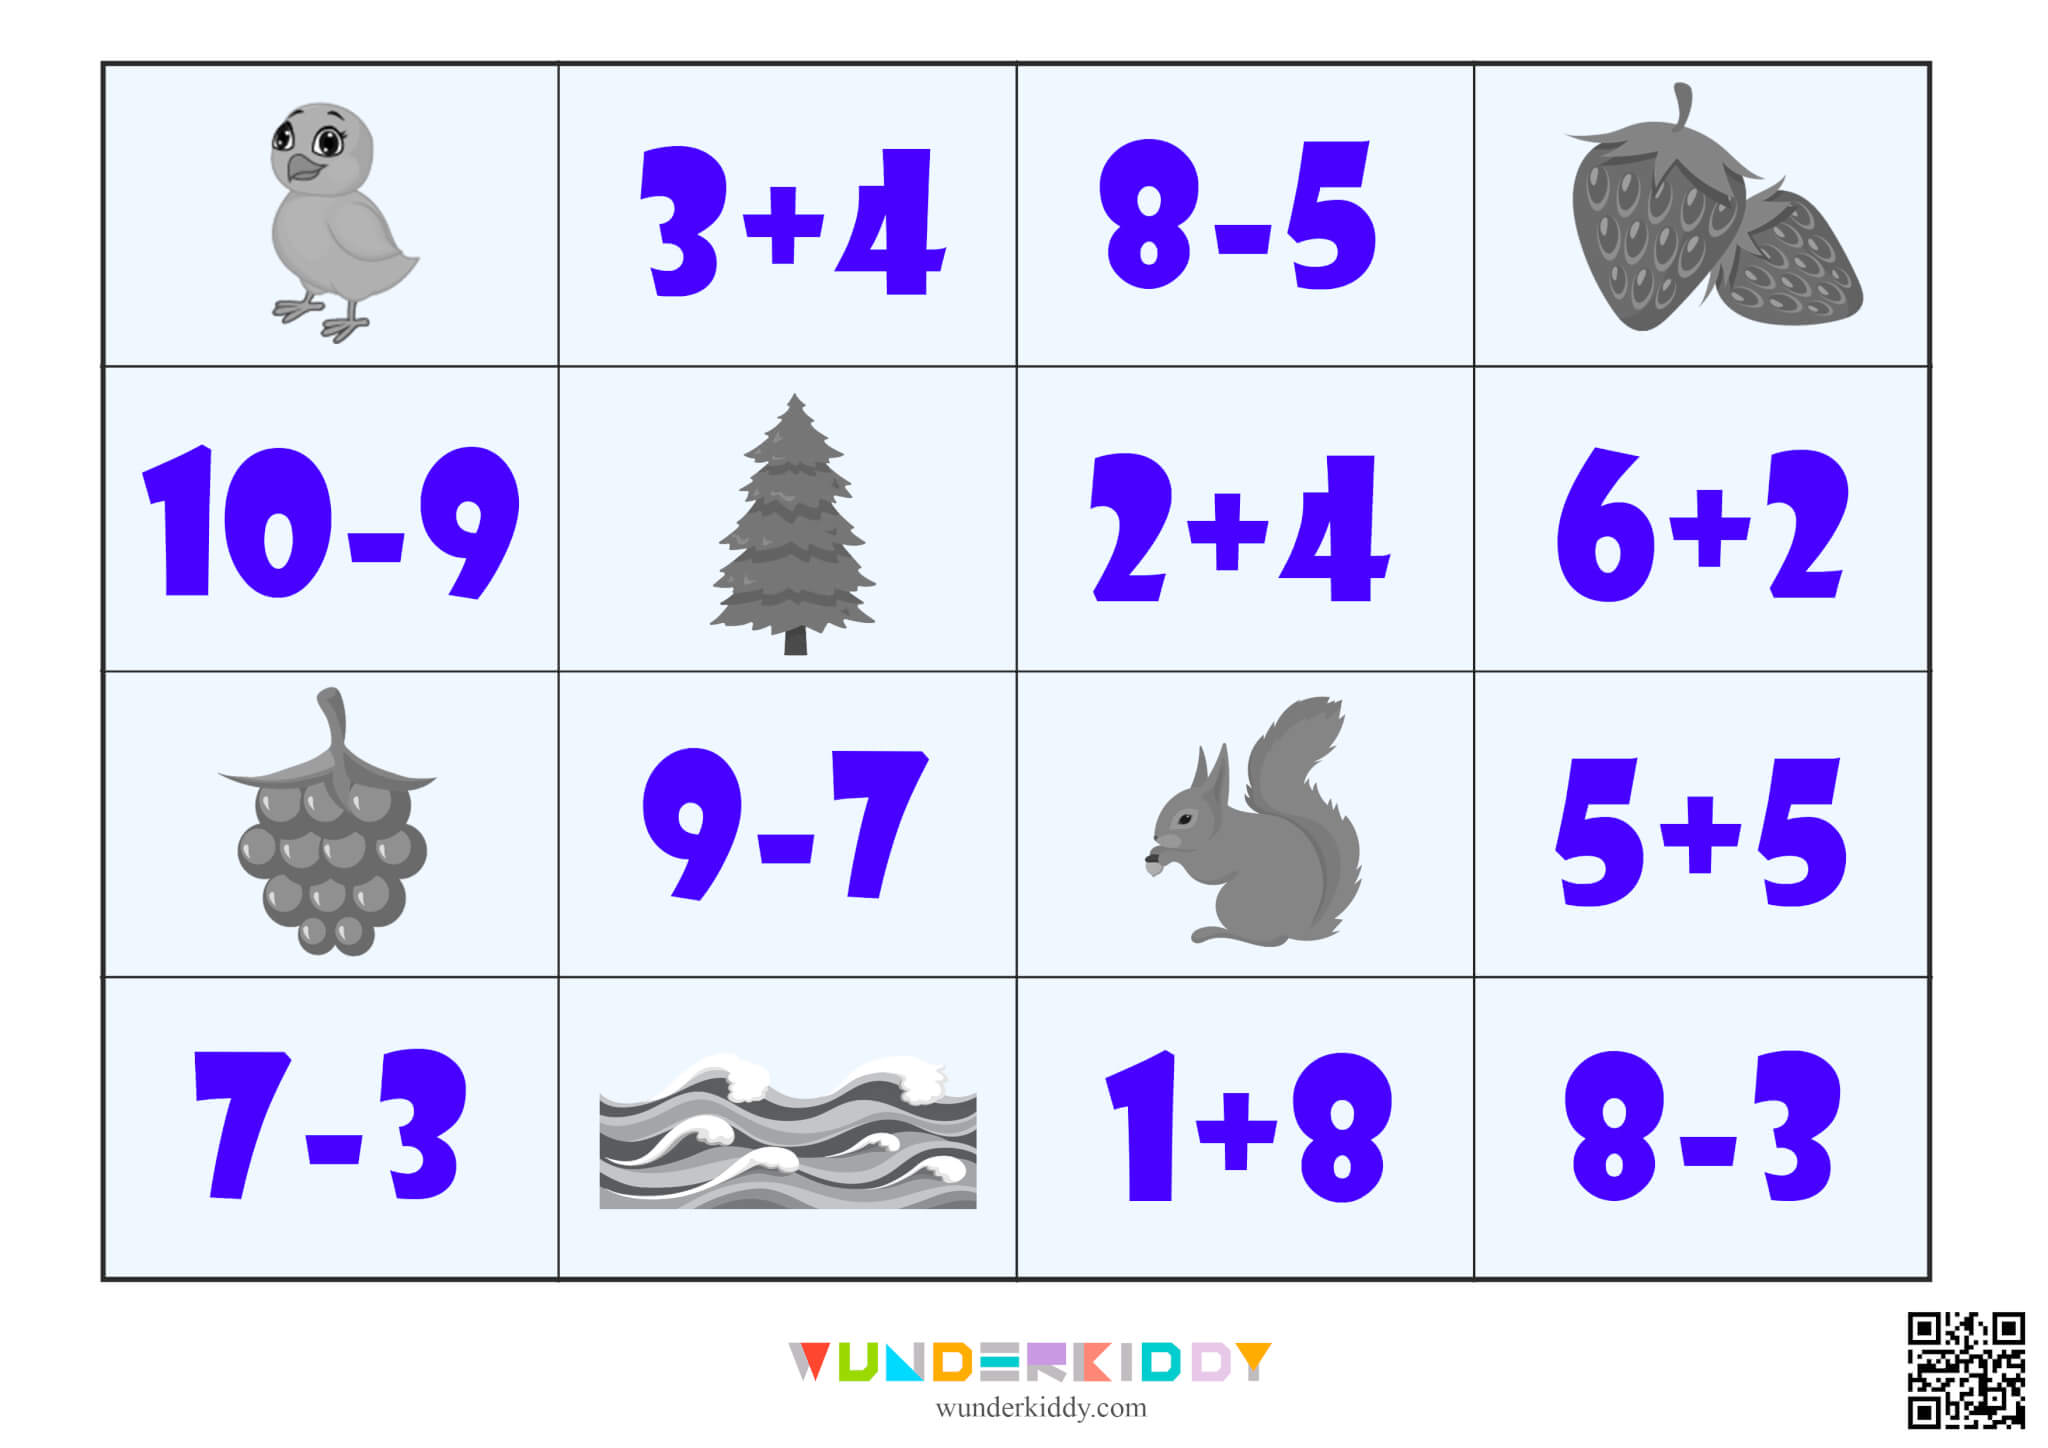 Fun Math Puzzle for Kids - Image 4